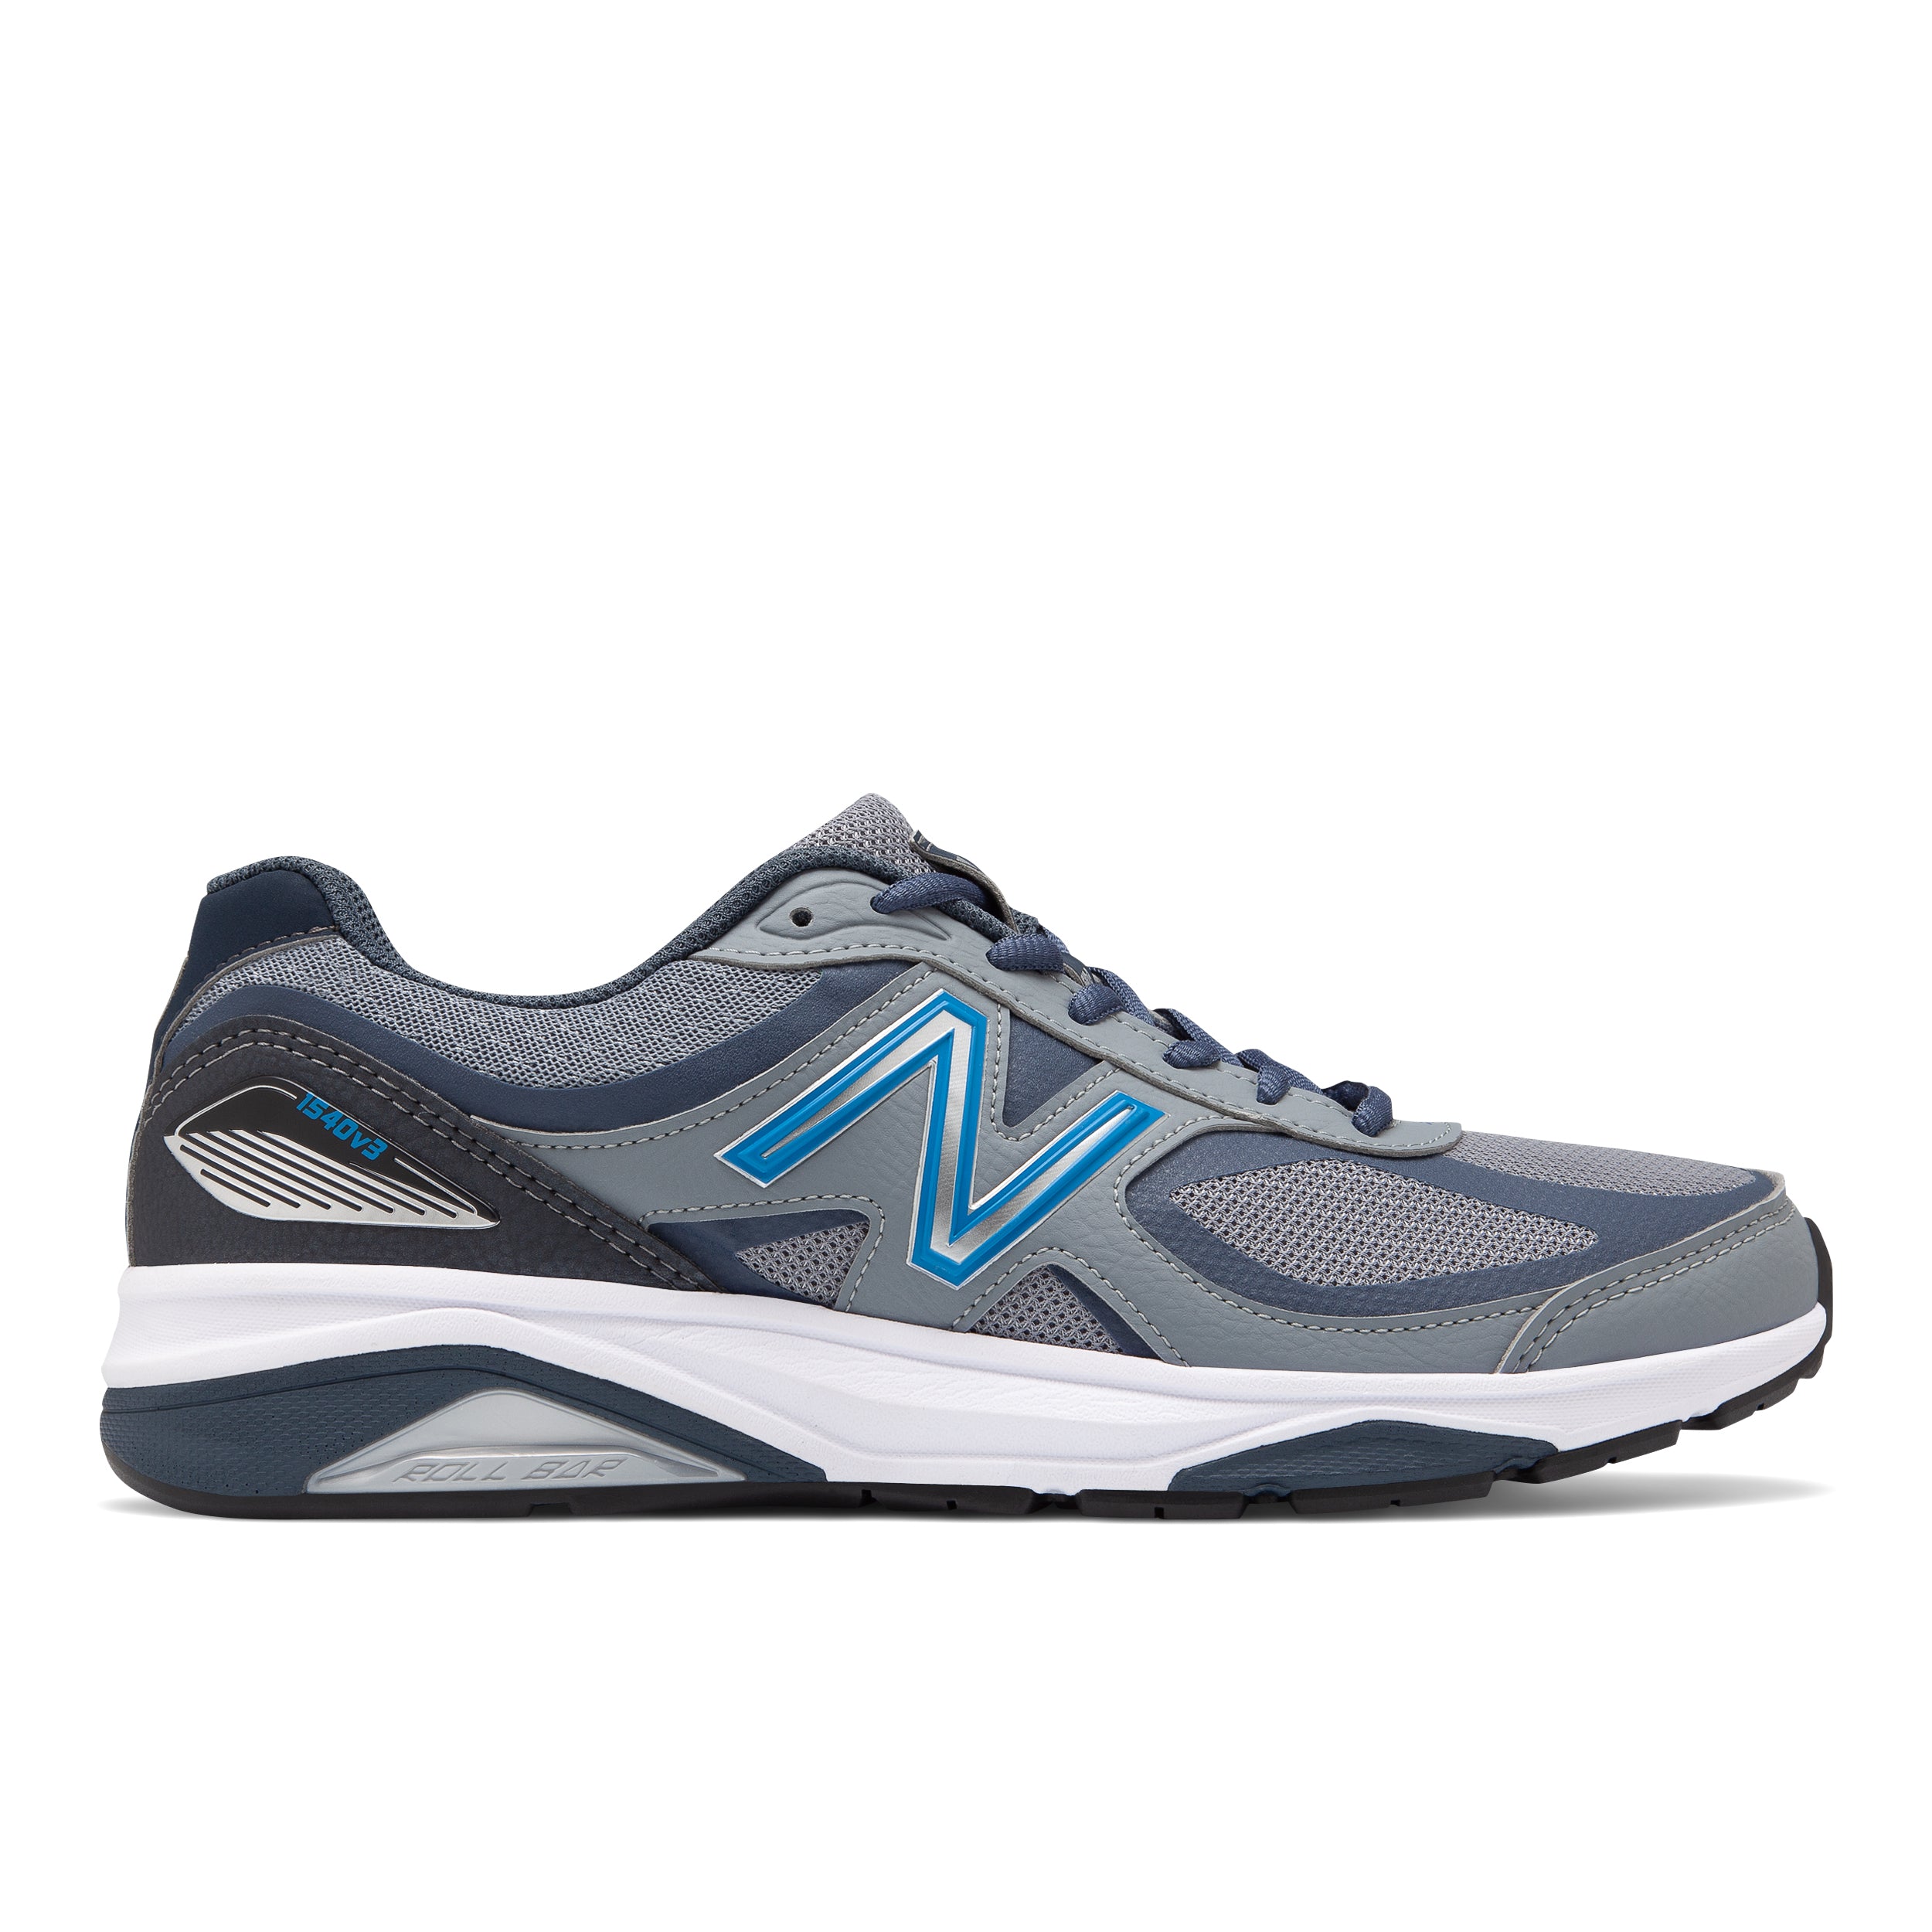 Men's New Balance M1540MB3 Stability Running Shoes with ROLLBAR